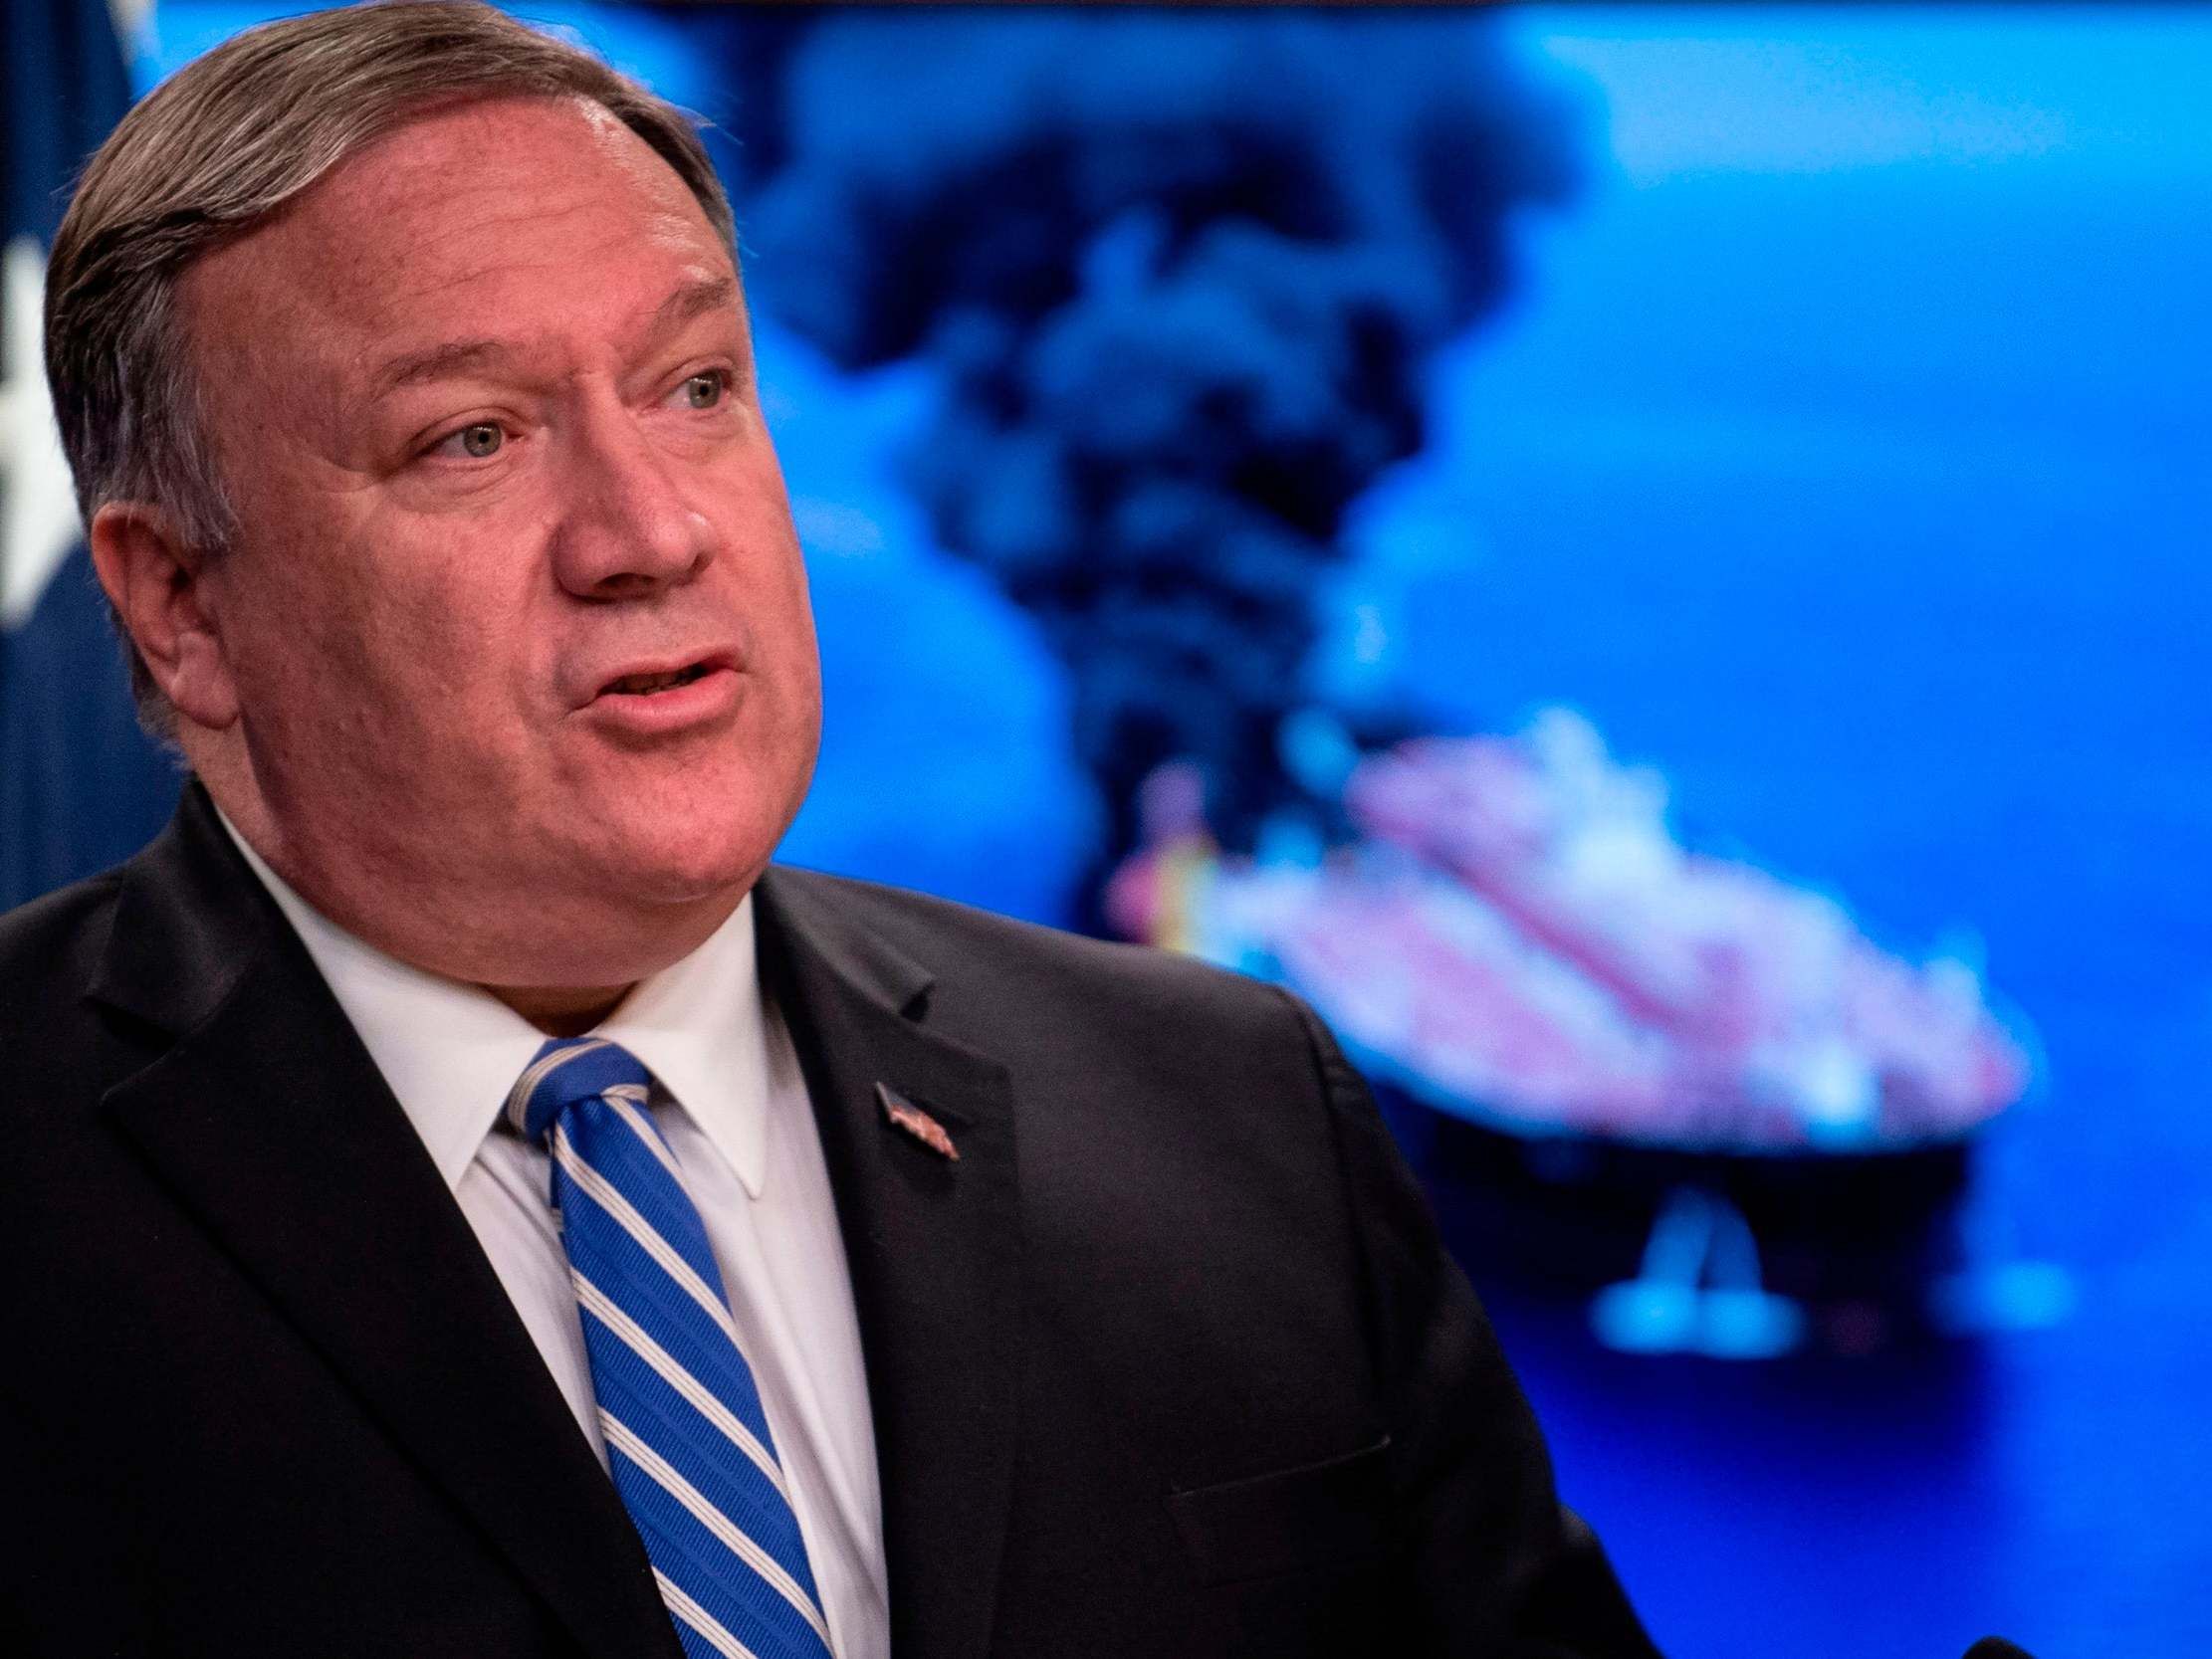 Pompeo says he is ready to travel to Iran, amid rising tensions